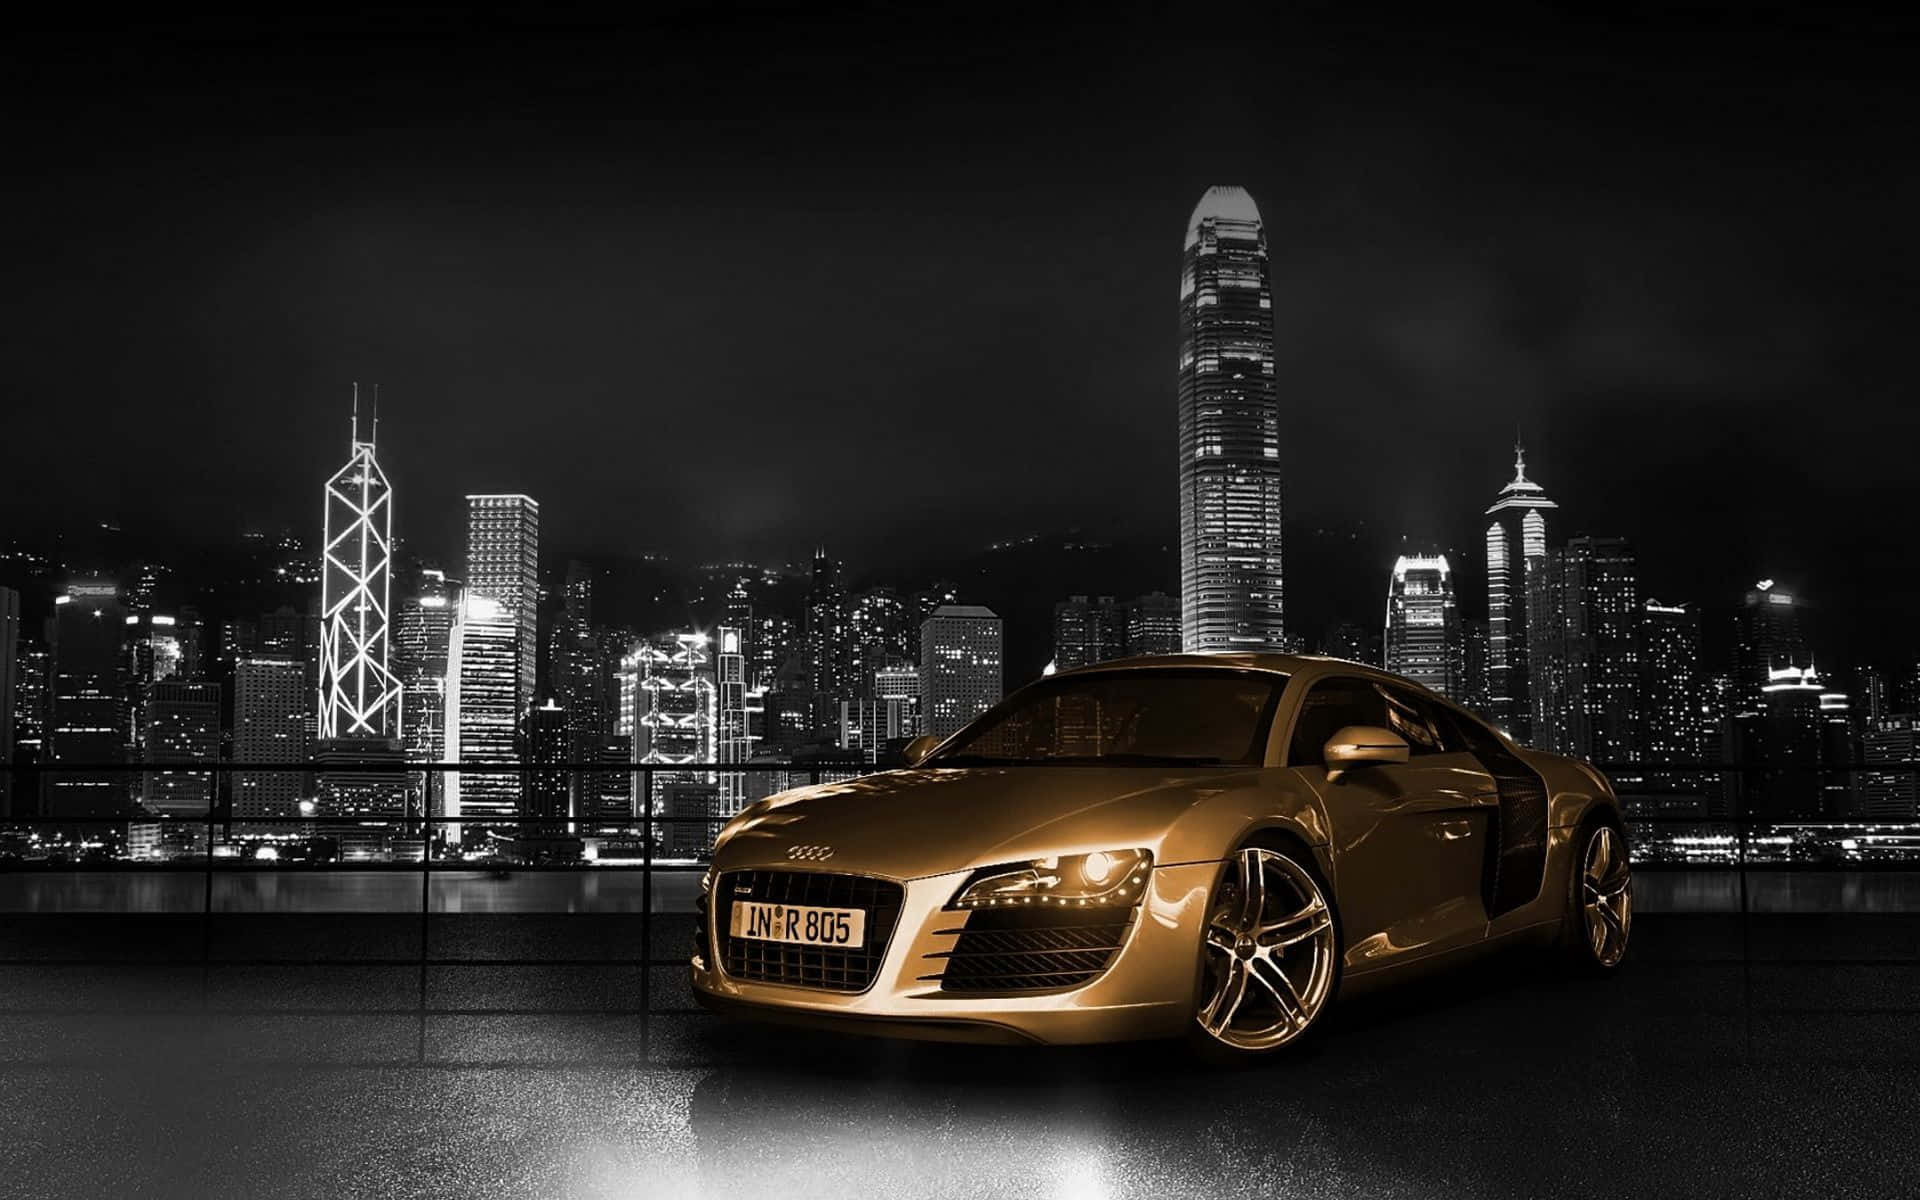 Gold Cars In Bw Cityscape Background